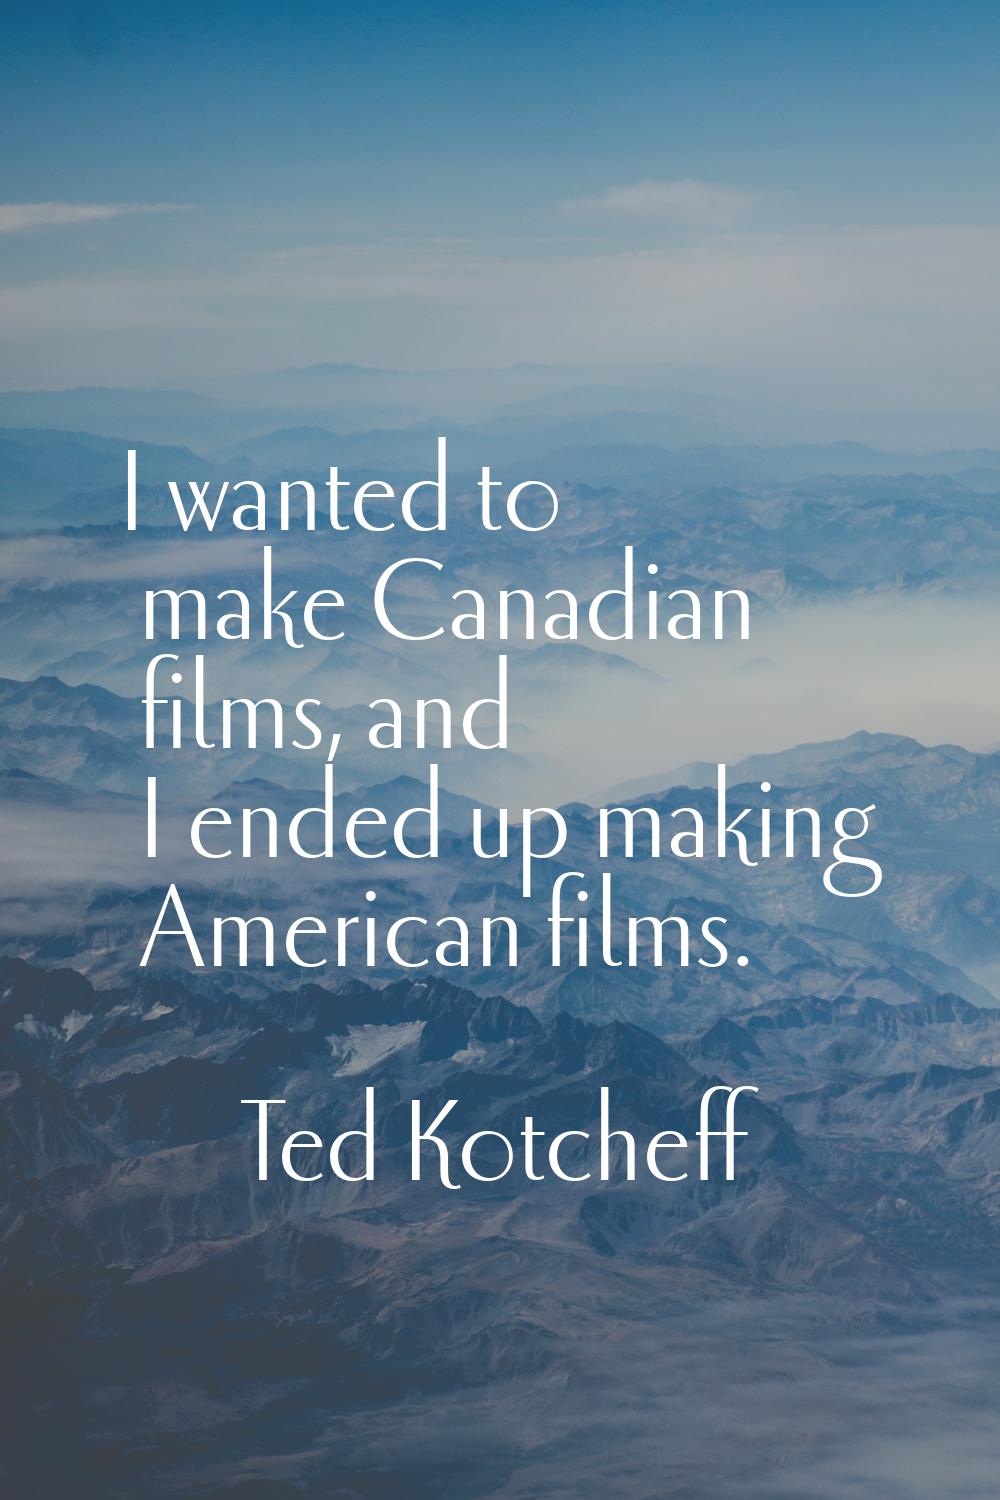 I wanted to make Canadian films, and I ended up making American films.